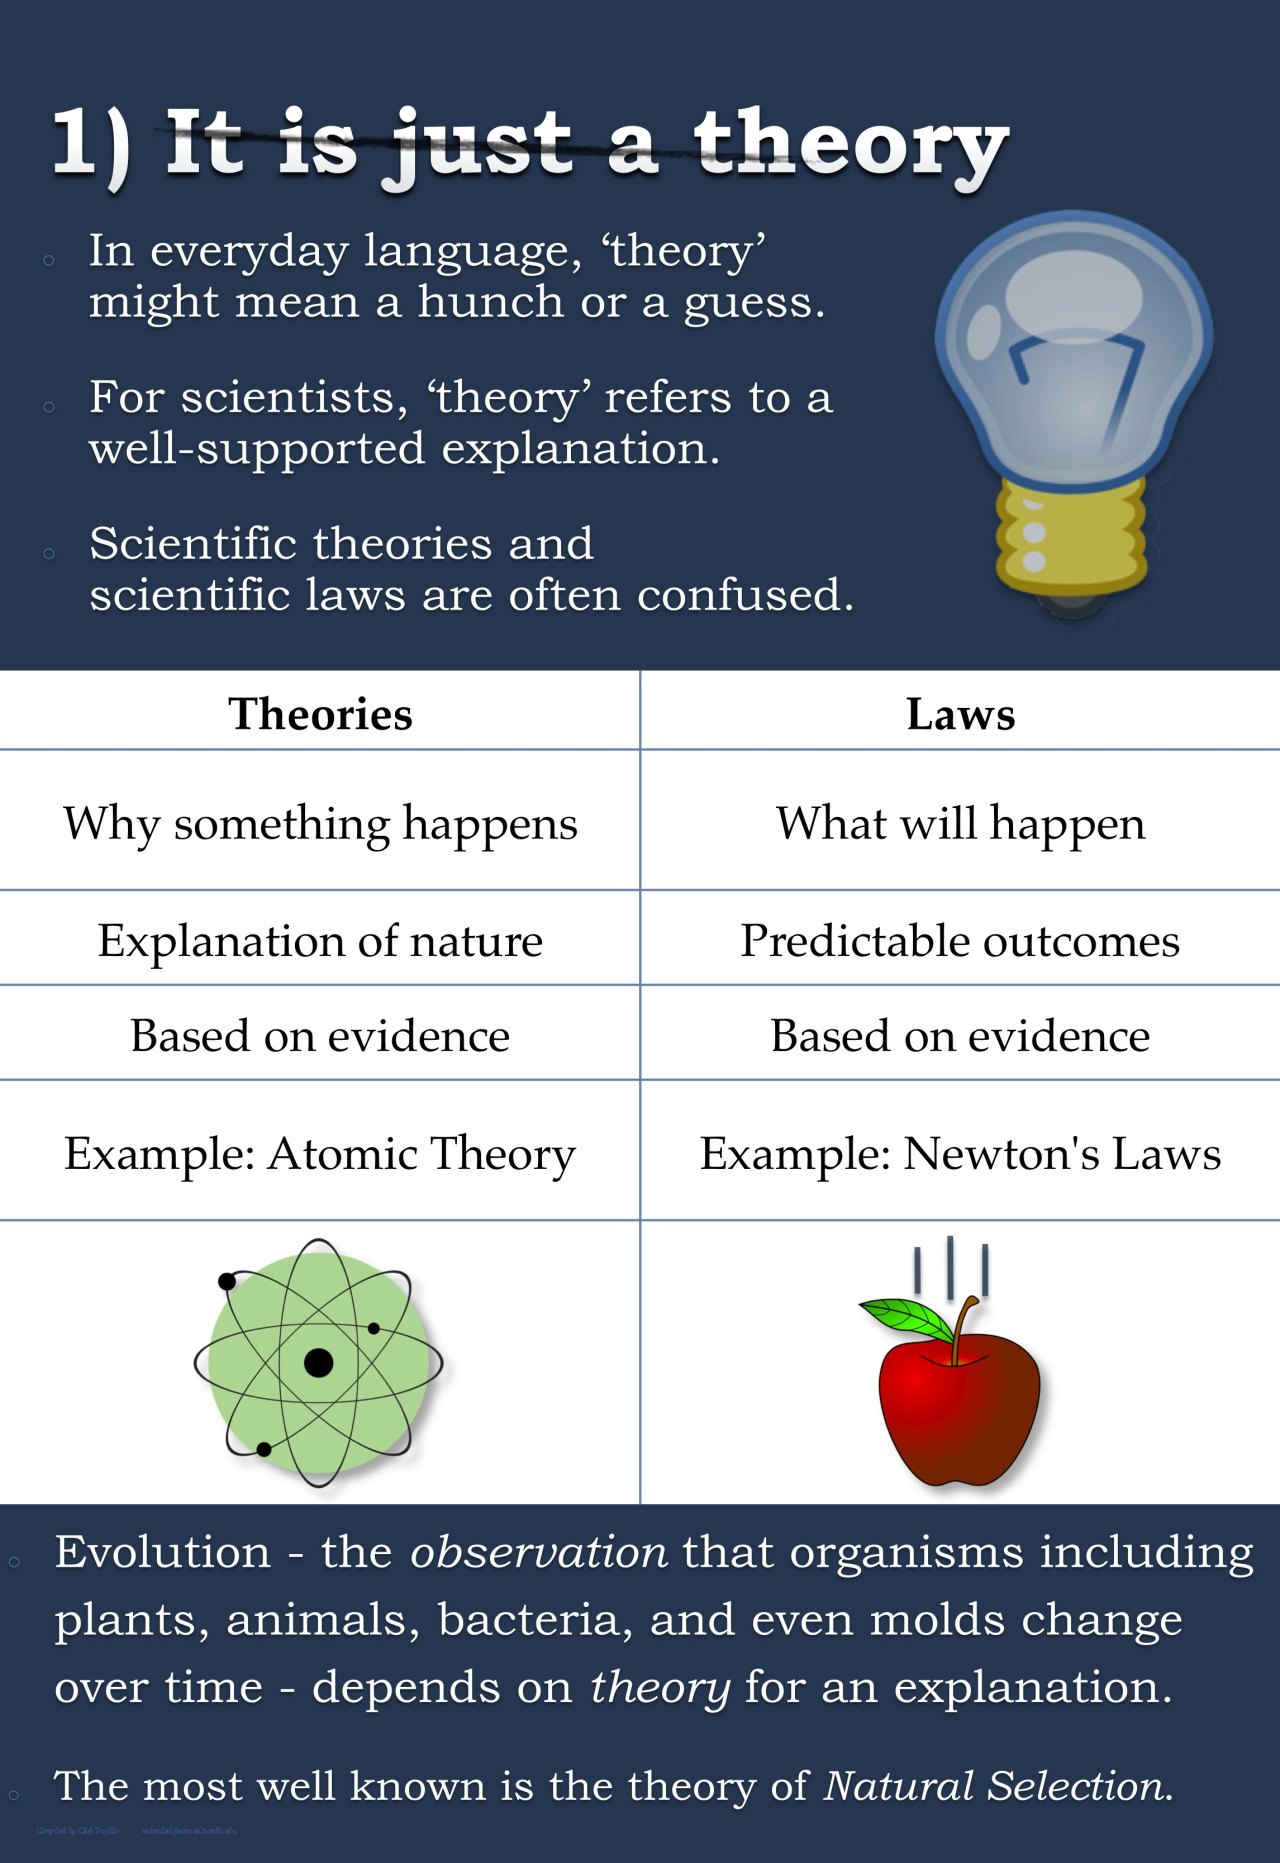 evolution misconceptions infographic down five breaks theory scientific why law common myths 1280